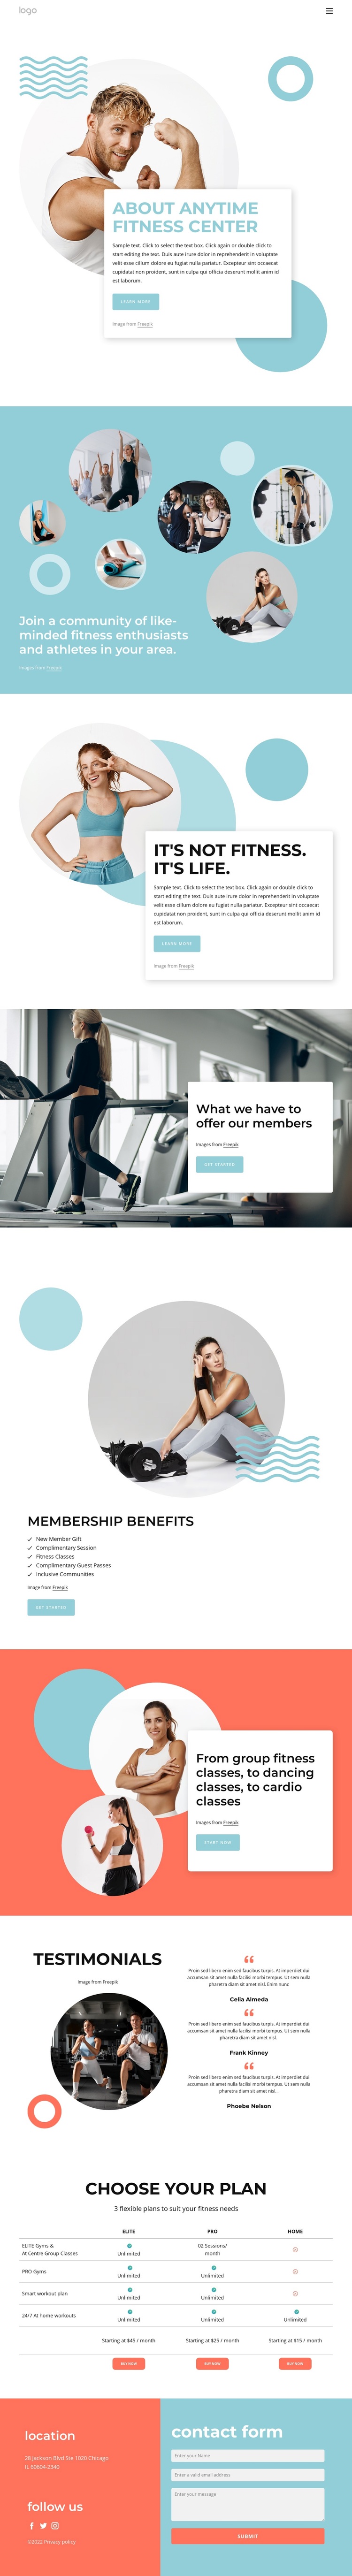 About Anytime fitness center Template